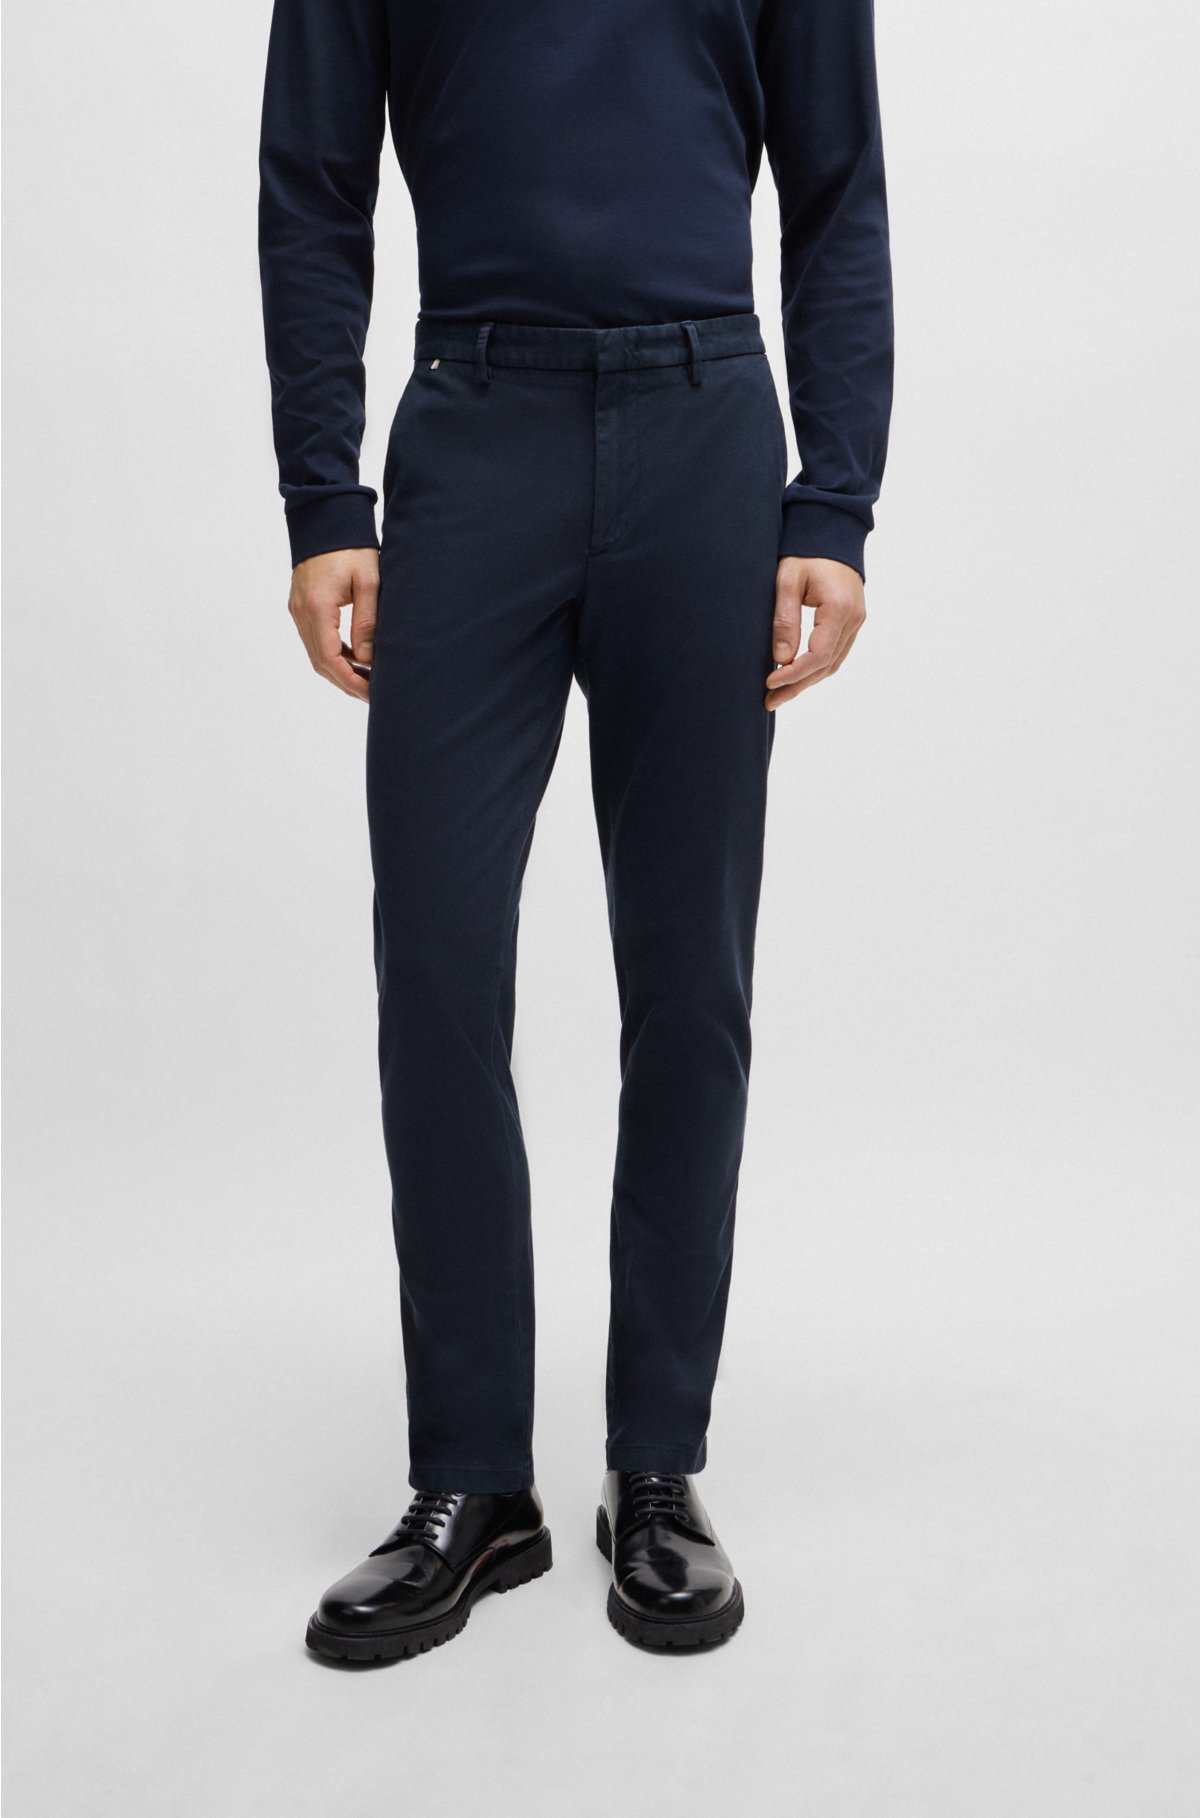 BOSS - Slim-fit chinos in a stretch-cotton blend